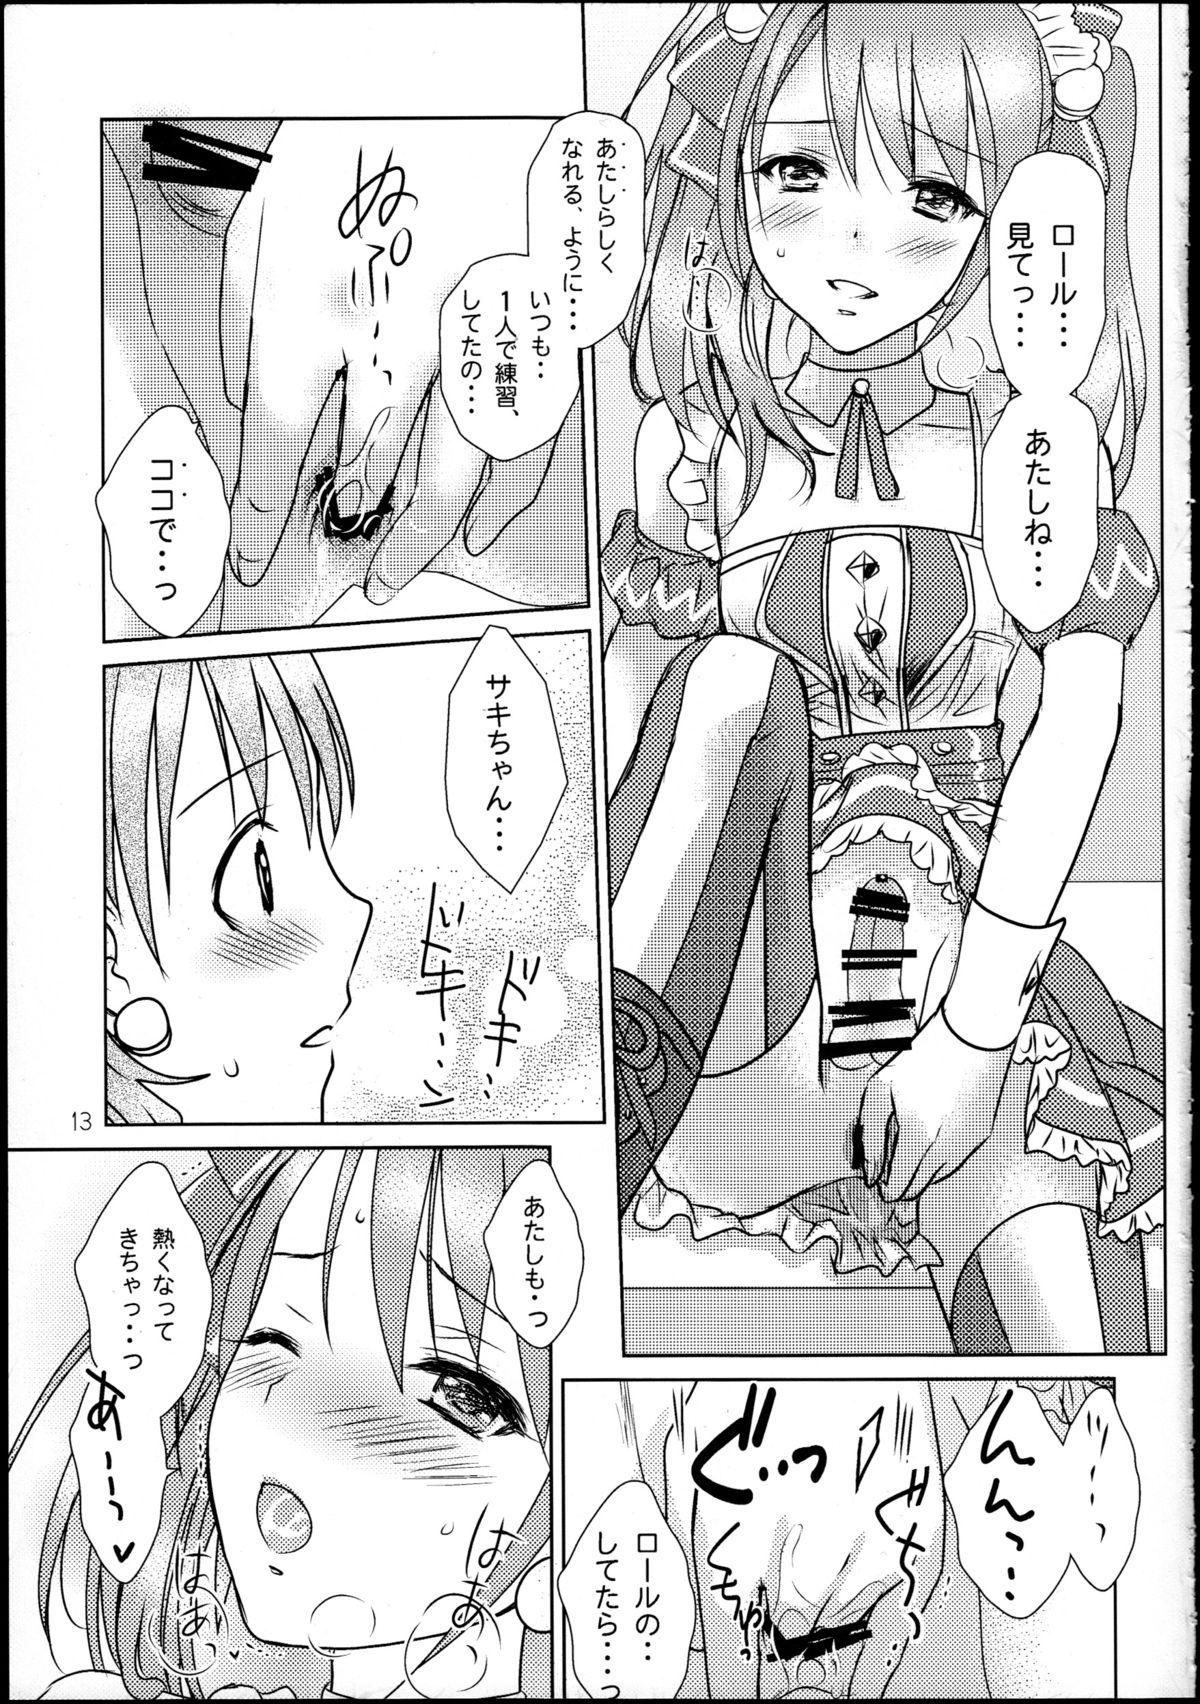 Virgin You're my special sweetest cake! - The idolmaster Transex - Page 12